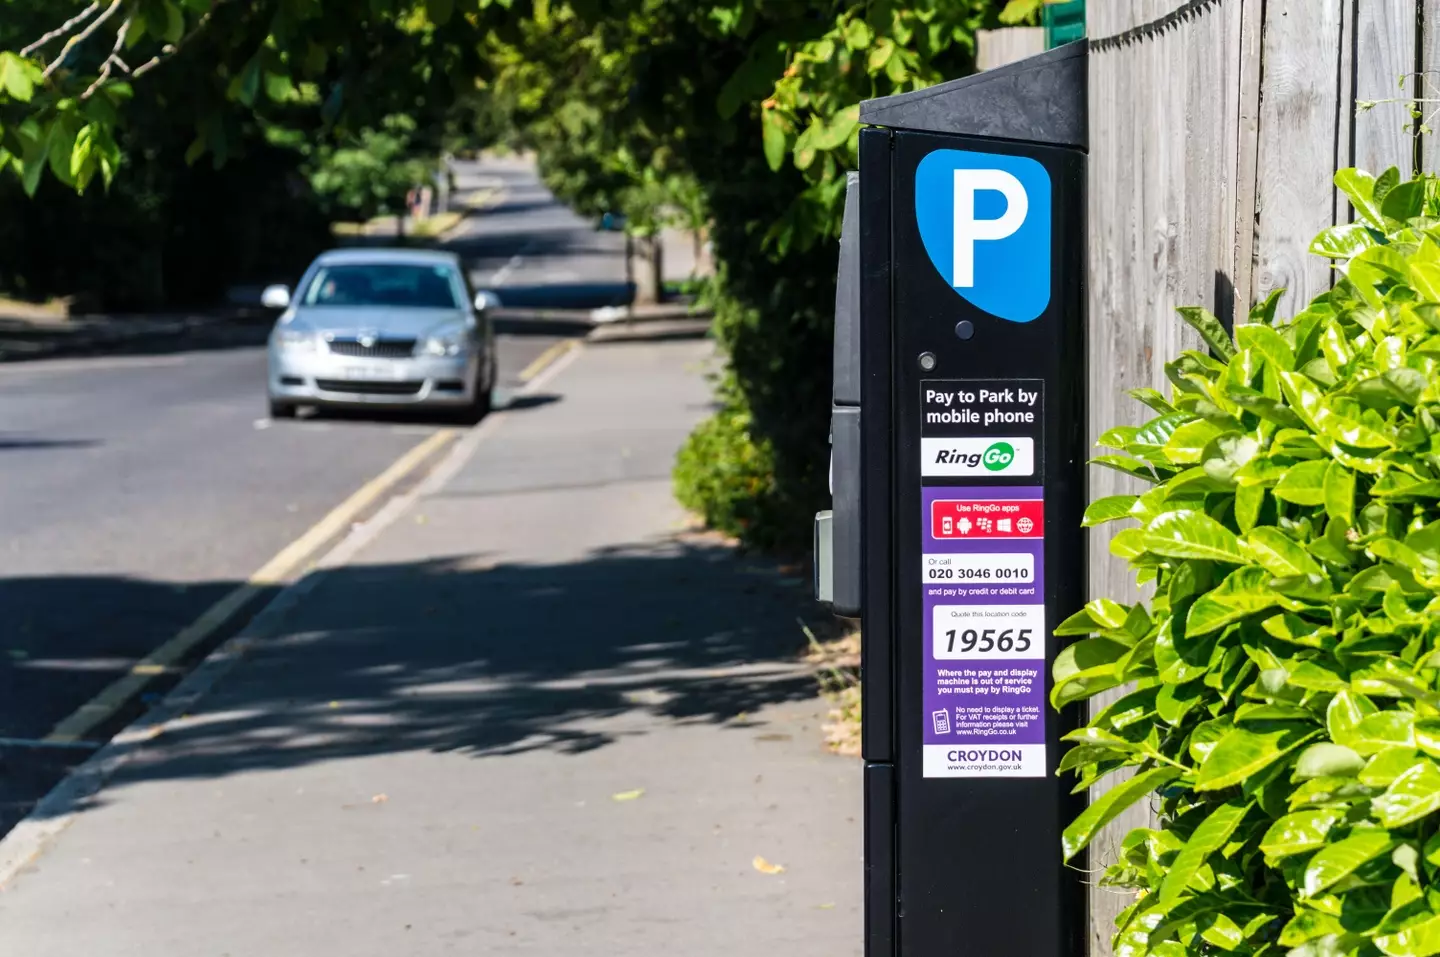 Pay and display parking machines are being scrapped across the UK.